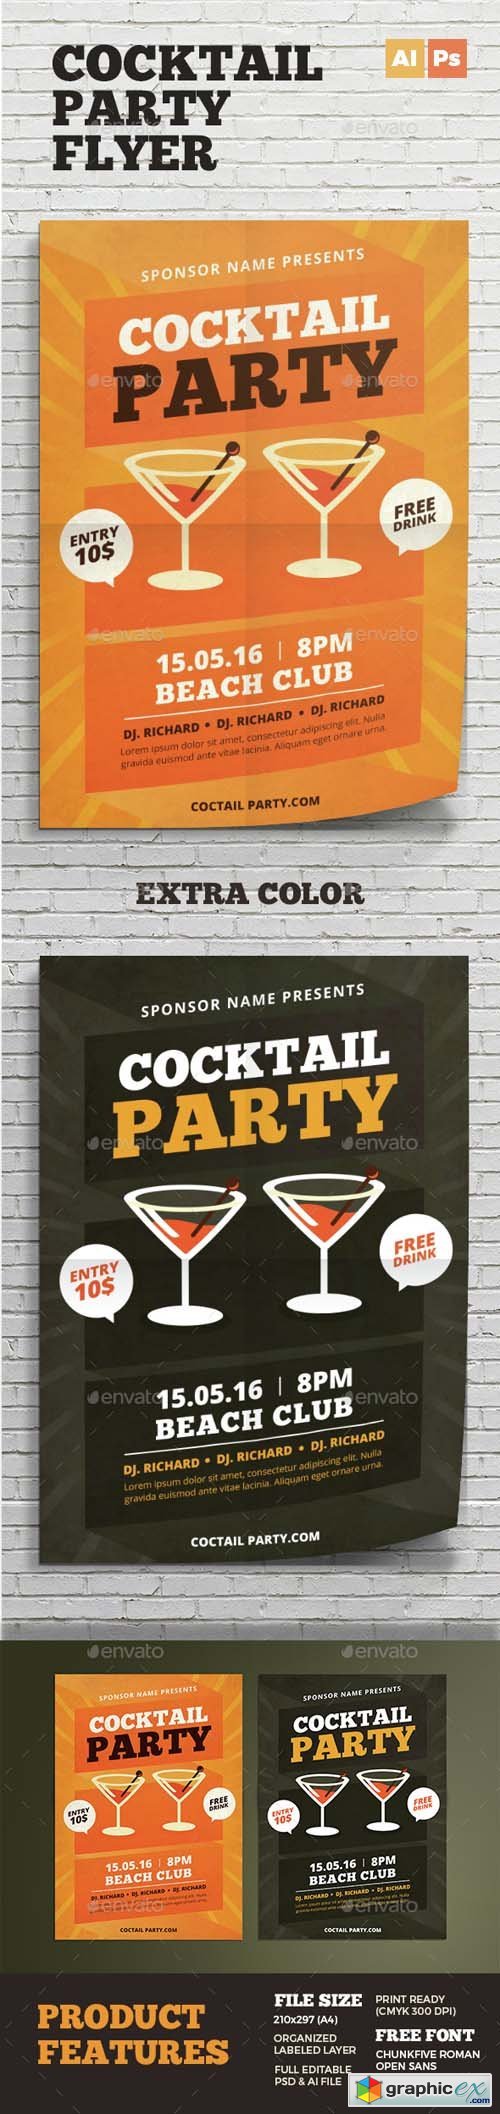 Cocktail Party Flyer 14555977